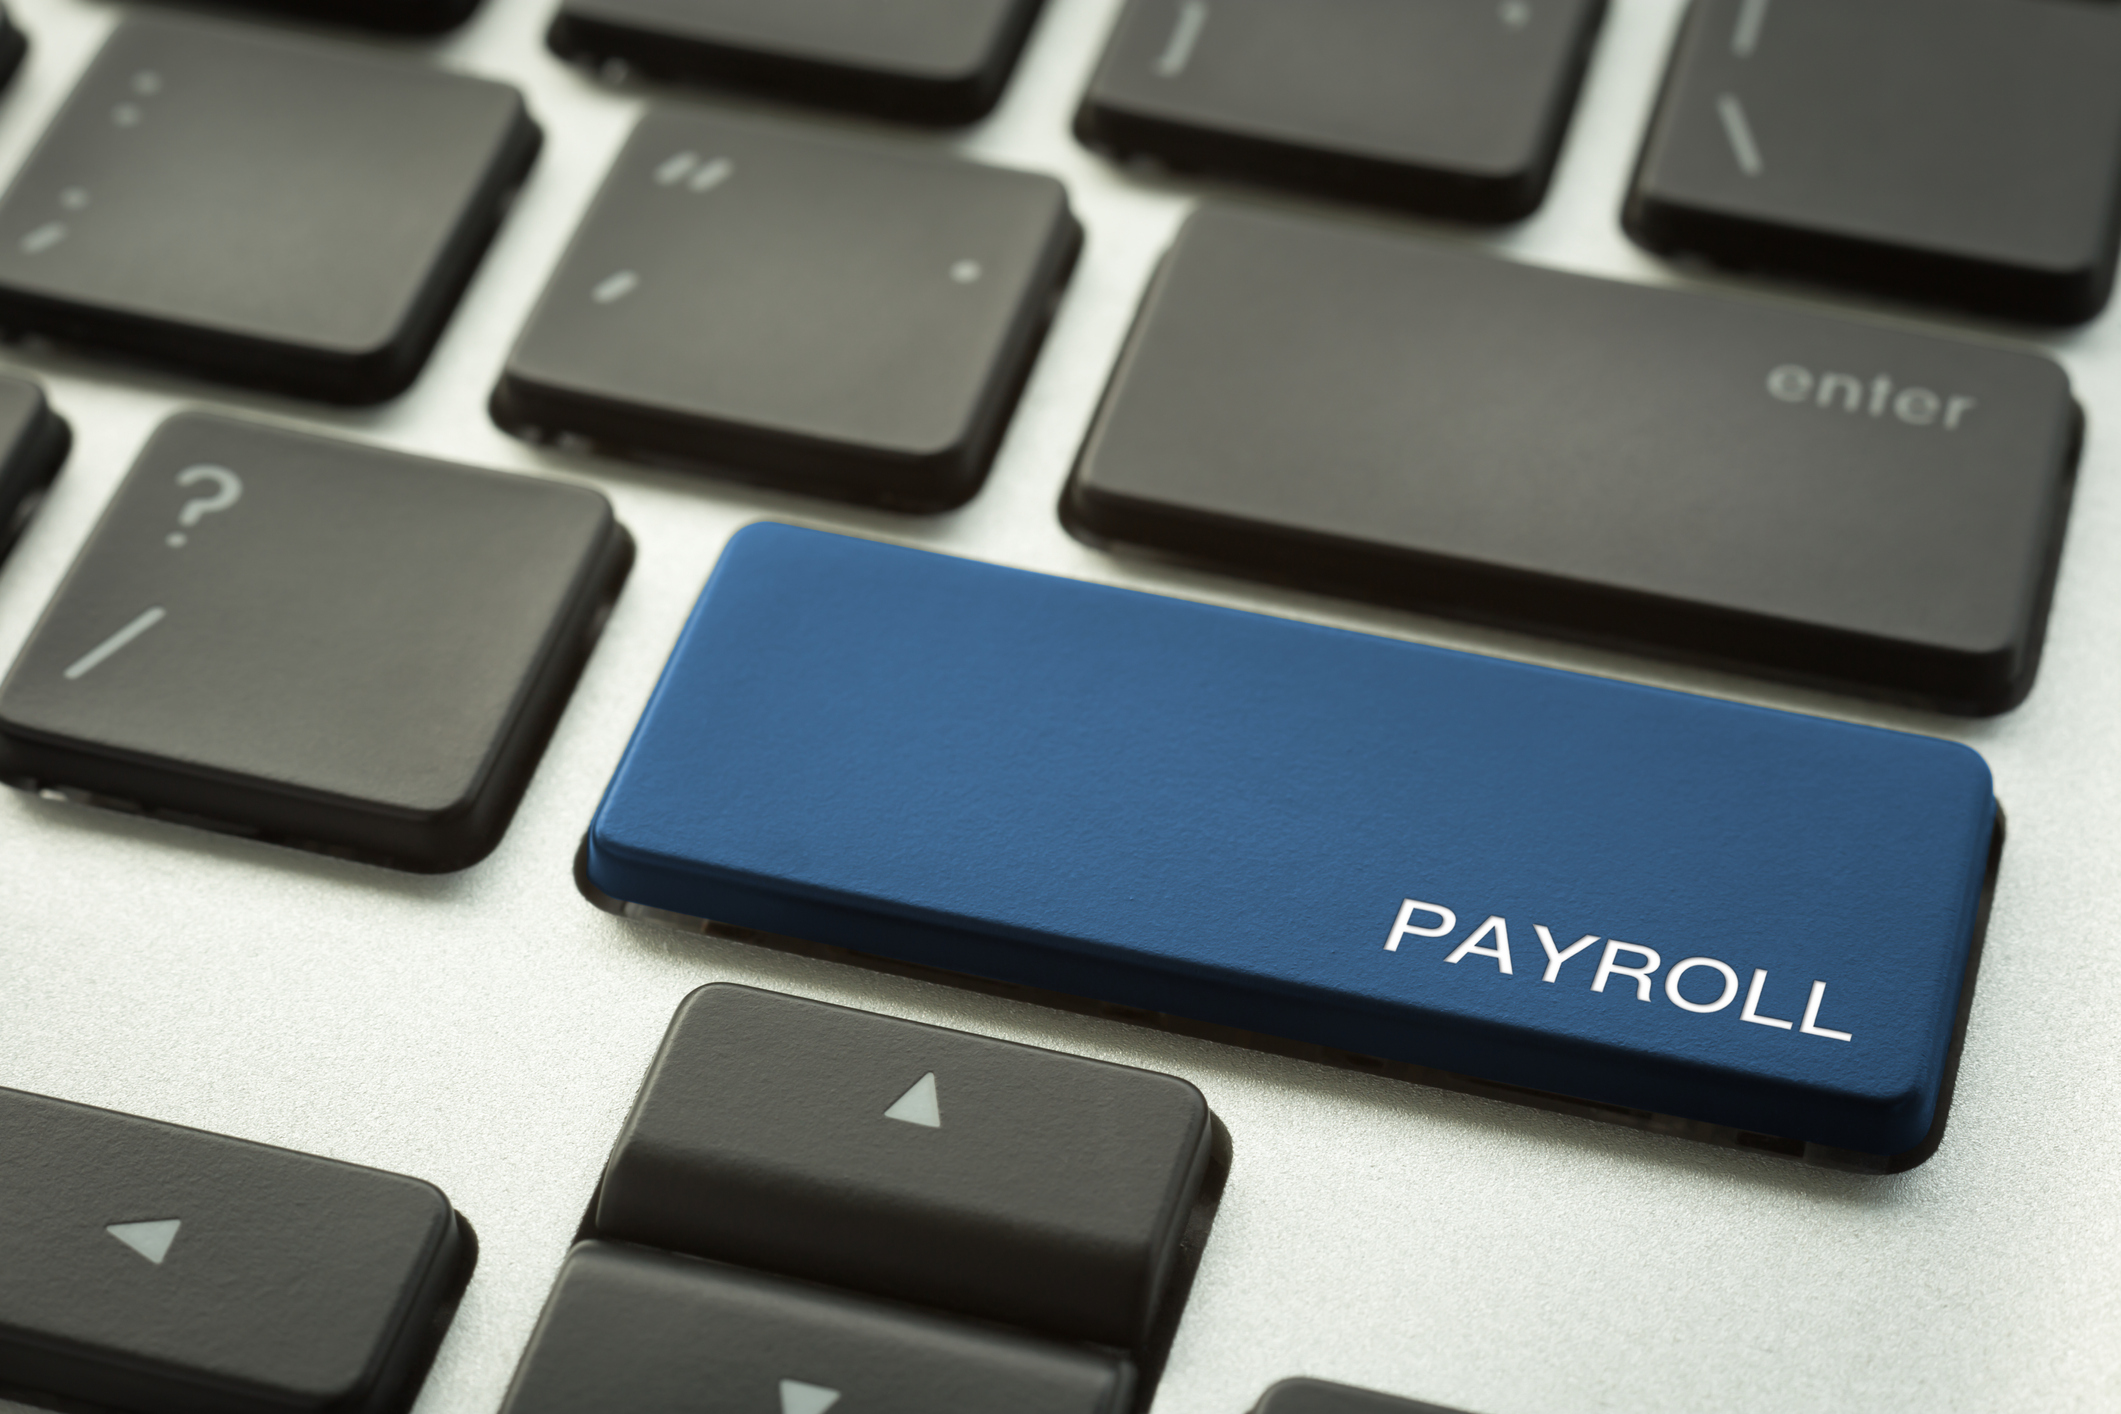 Laptop keyboard button with word PAYROLL.